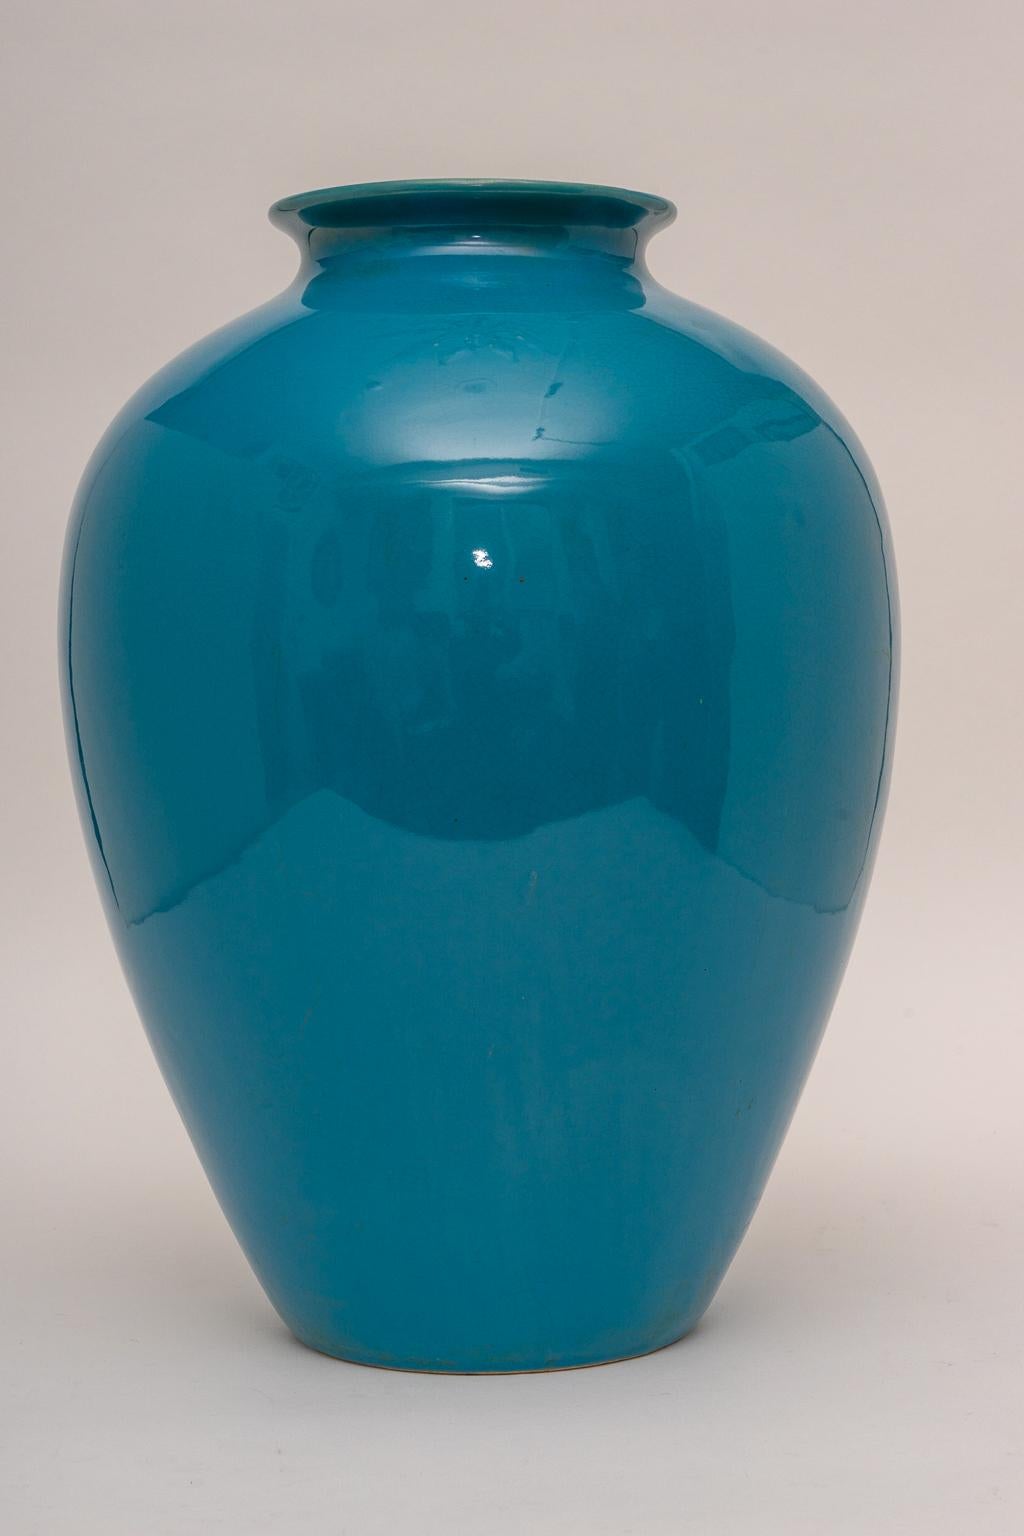 This stylish and chic Italian vase was acquired from a Palm Beach estate and will definitely make a statement with its large scale and dramatic Peking blue coloration.